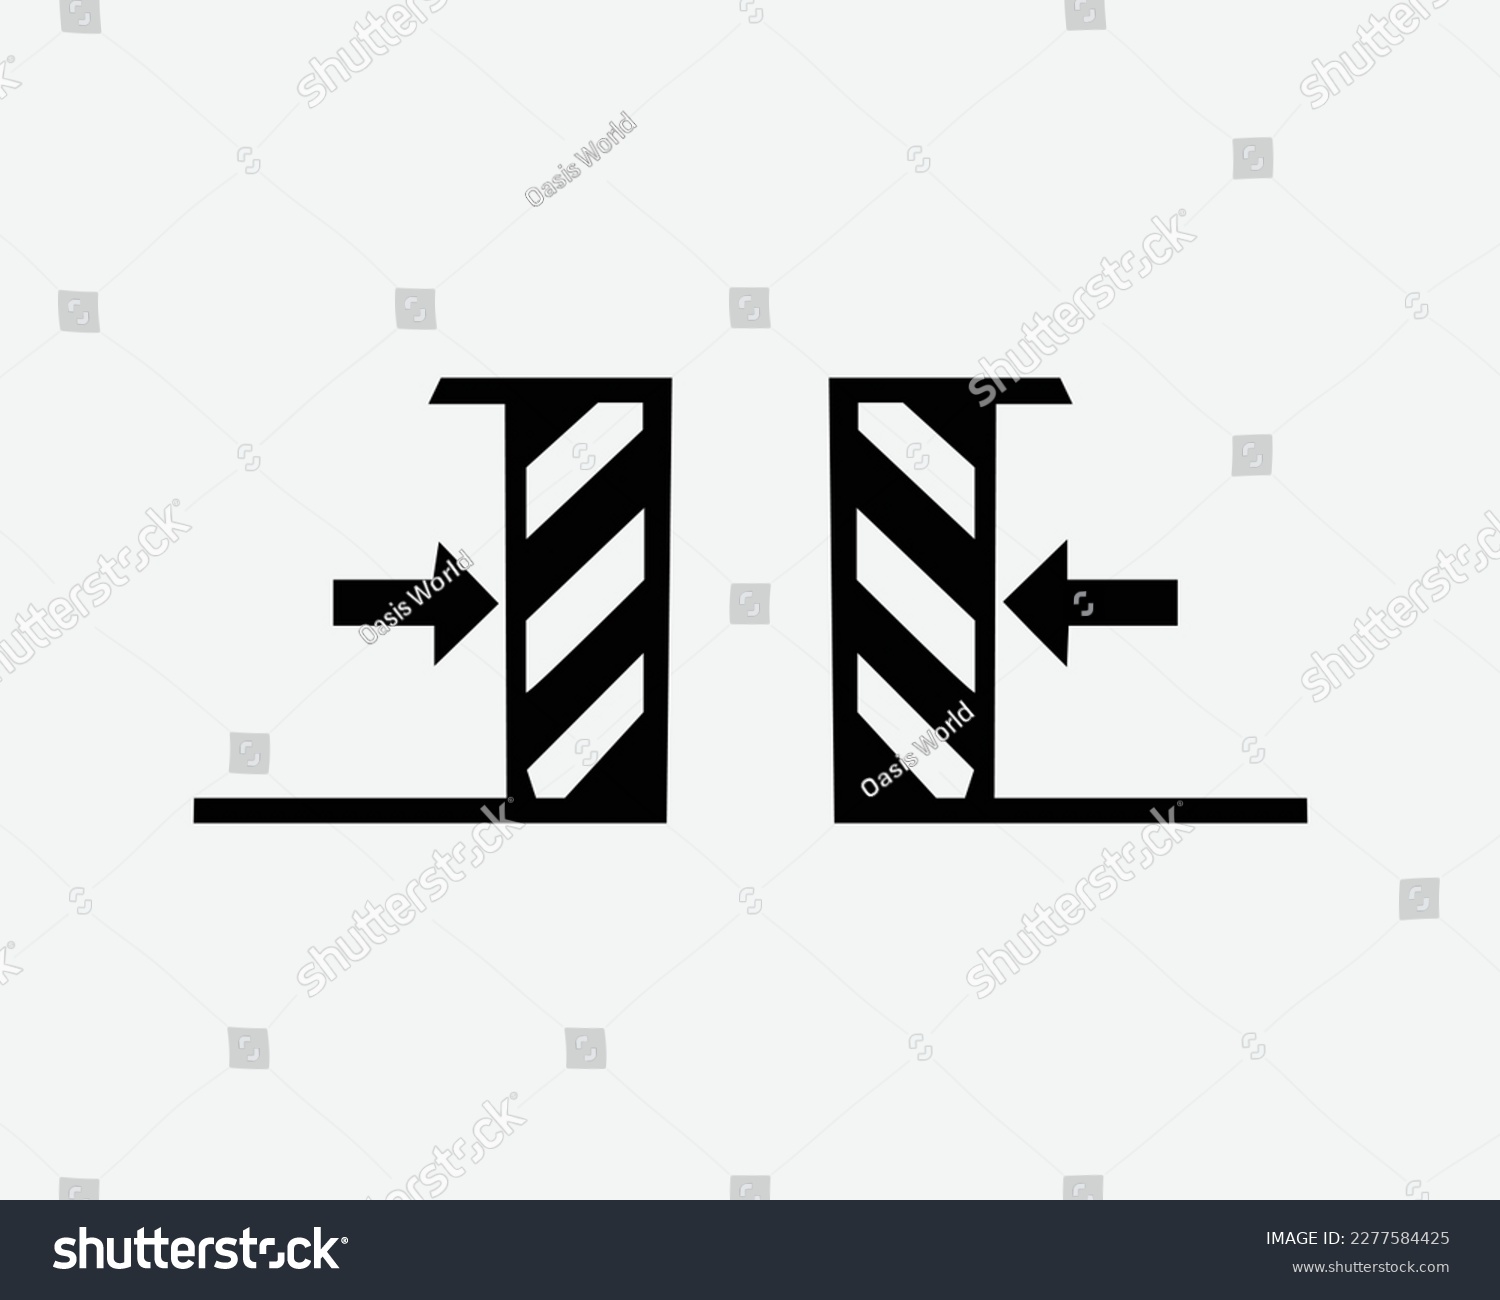 SVG of Barrier Closing Icon Door Close Auto Automatic Sliding Black White Silhouette Symbol Icon Sign Graphic Clipart Artwork Illustration Pictogram Vector svg